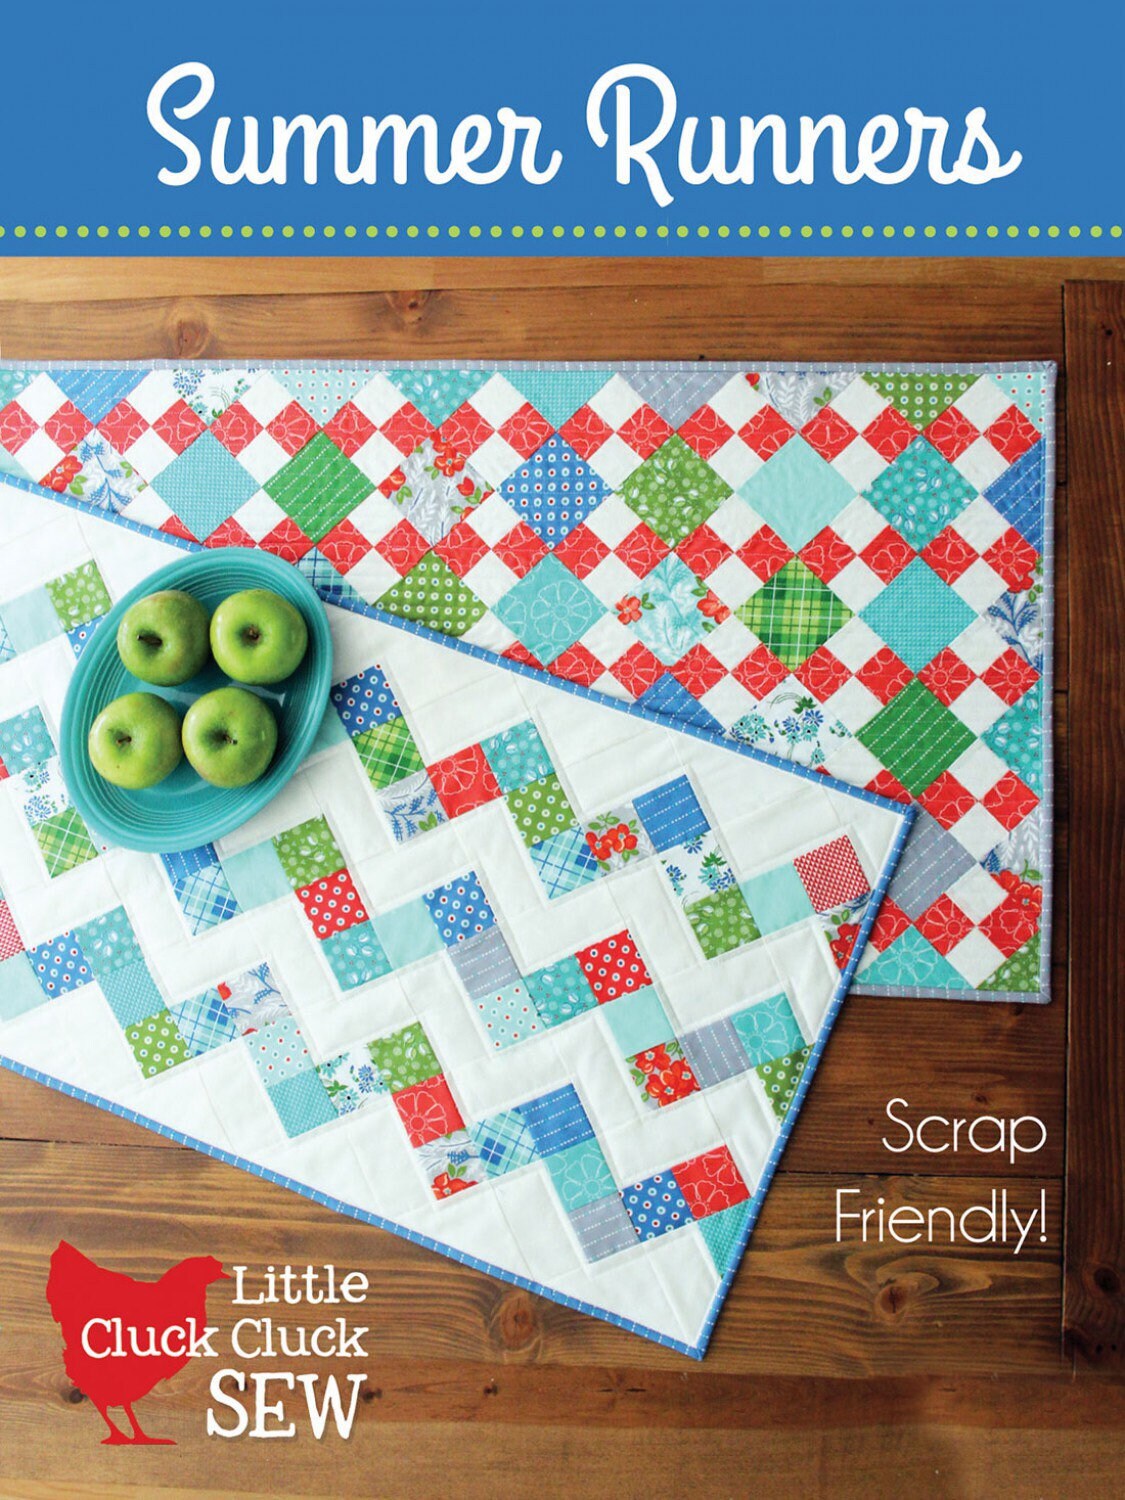 Summer Runners Table Runner Pattern - Cluck Cluck Sew - 2 patterns in one